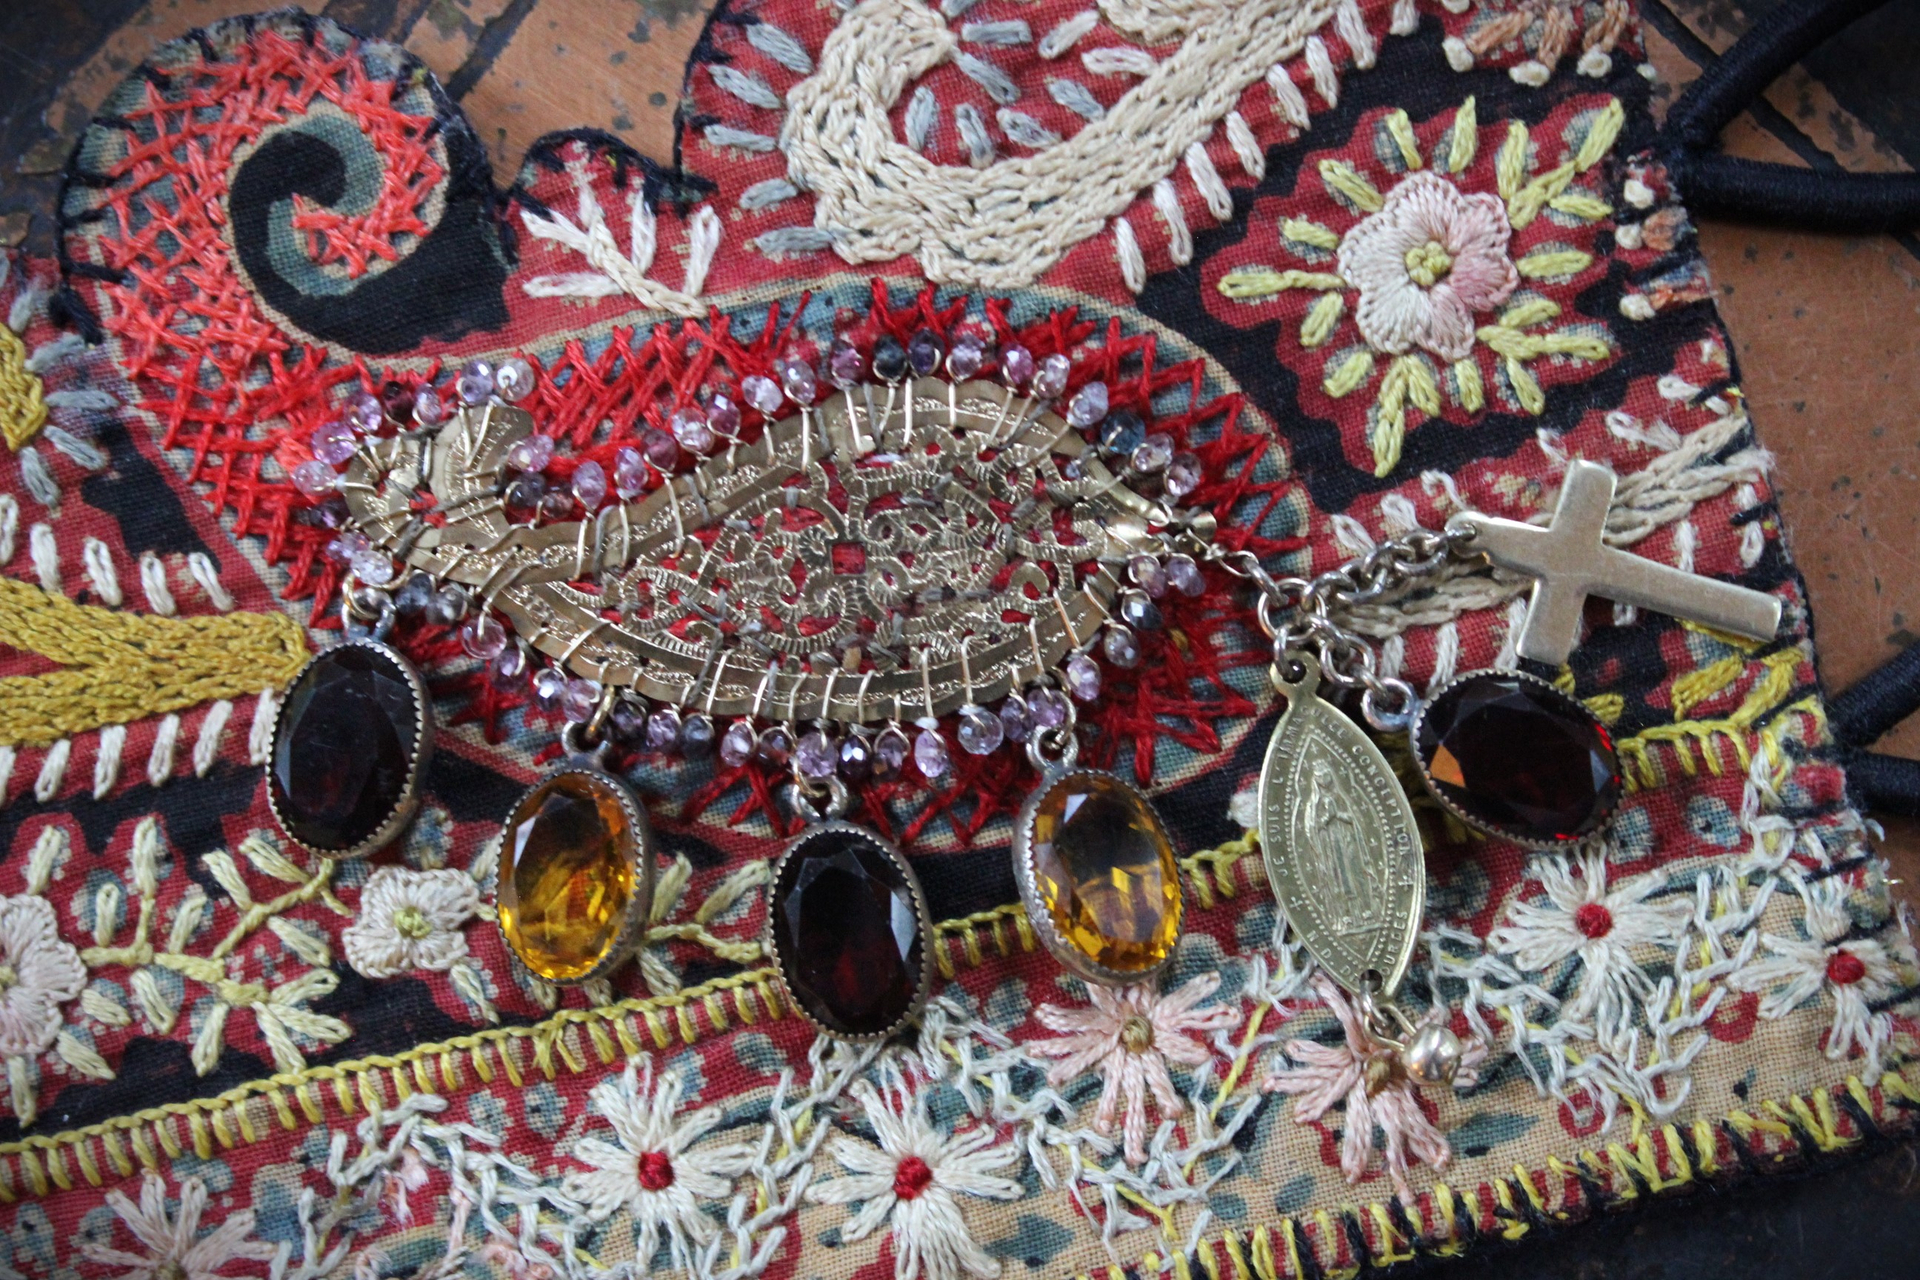 One Spirit Cuff Bracelet & Earring Set w/Antique Embroidered Paisley Textile,14K GF Open Work & Gemstone Paisleys, Antique Sawtooth Set Crystals & More!